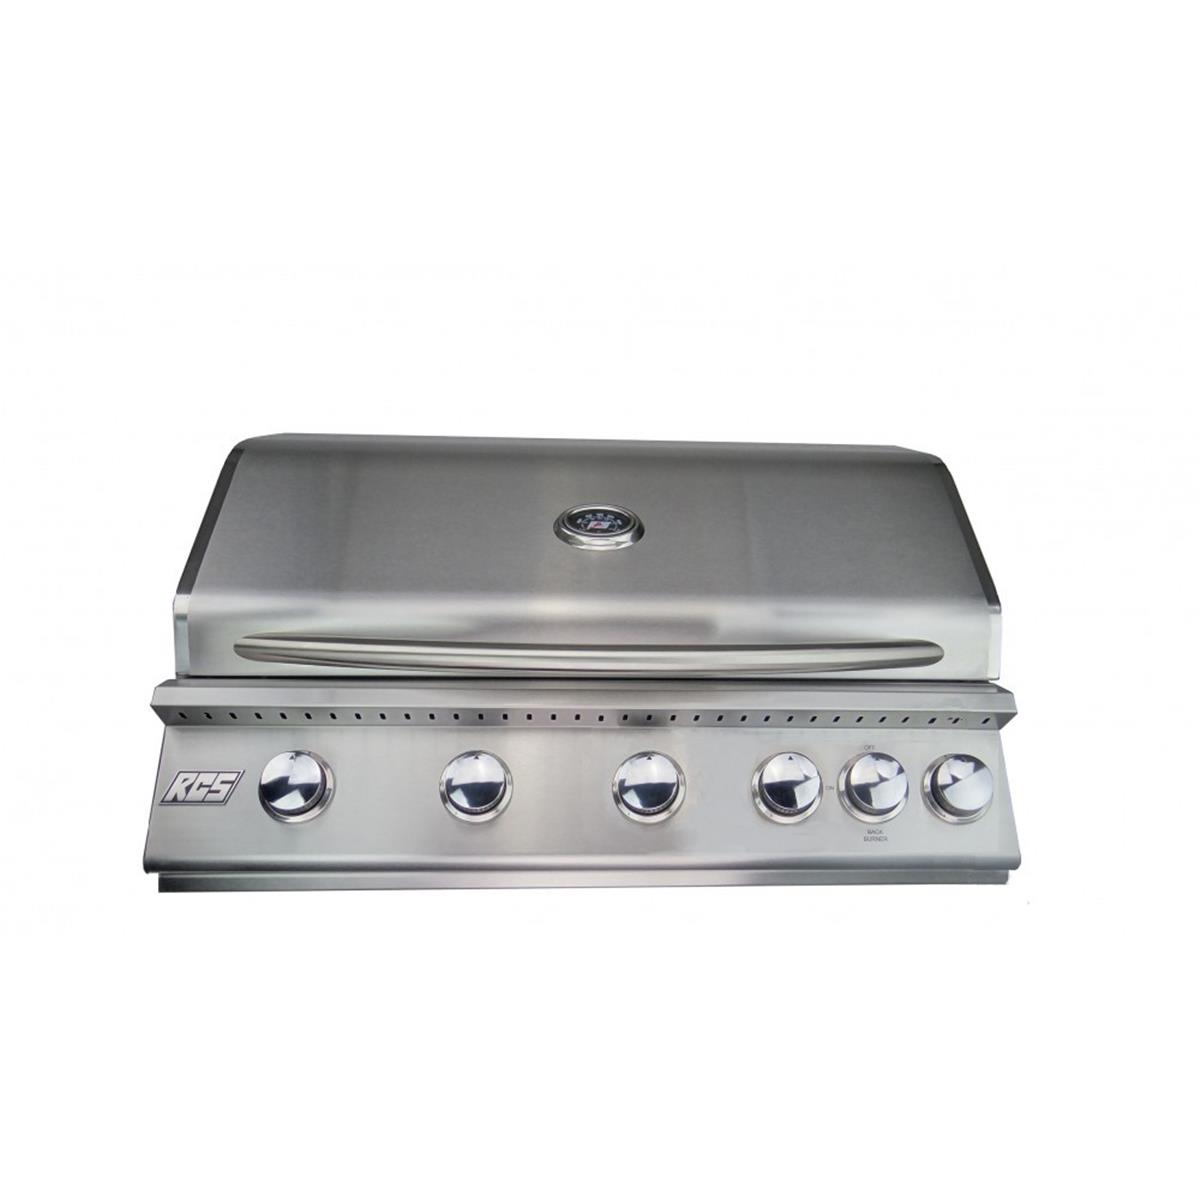 Rjc40a 40 In. Premier Grill With Rear Burner